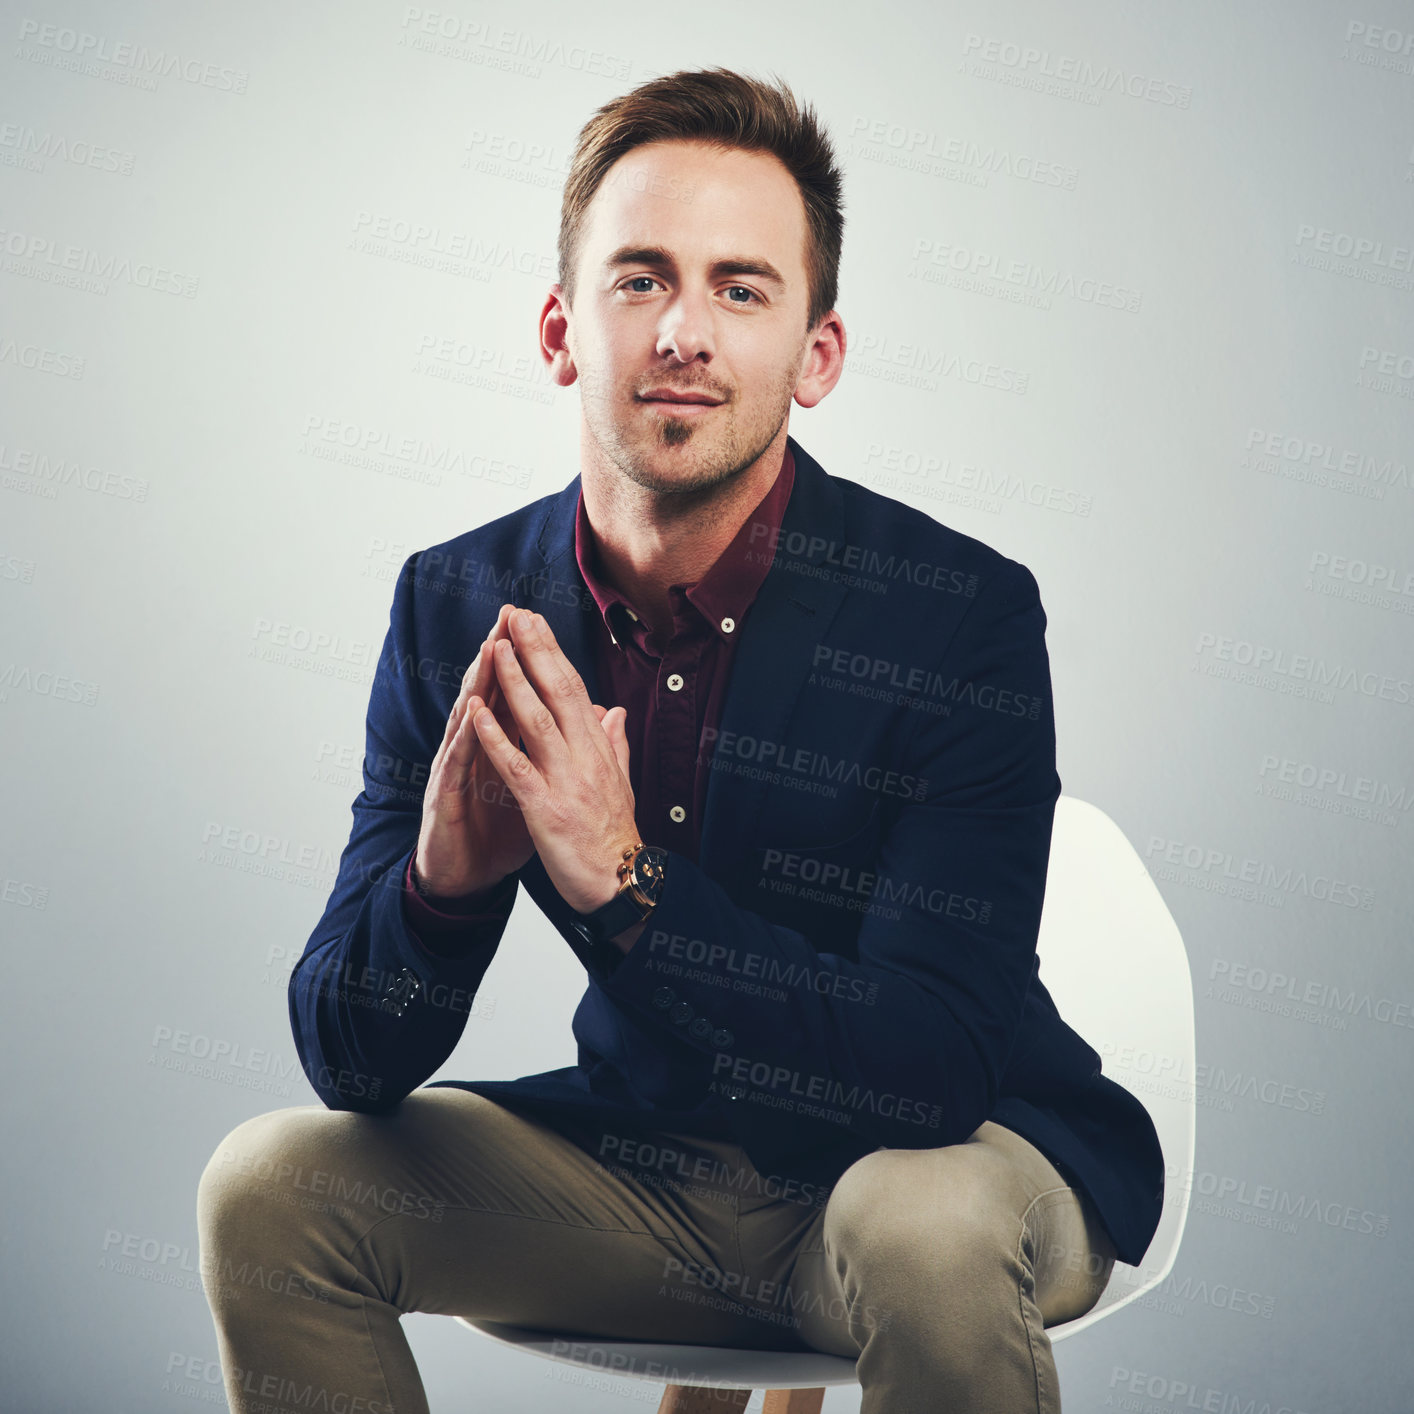 Buy stock photo Studio portrait of a confident young businessman sitting on a chair against a gray background